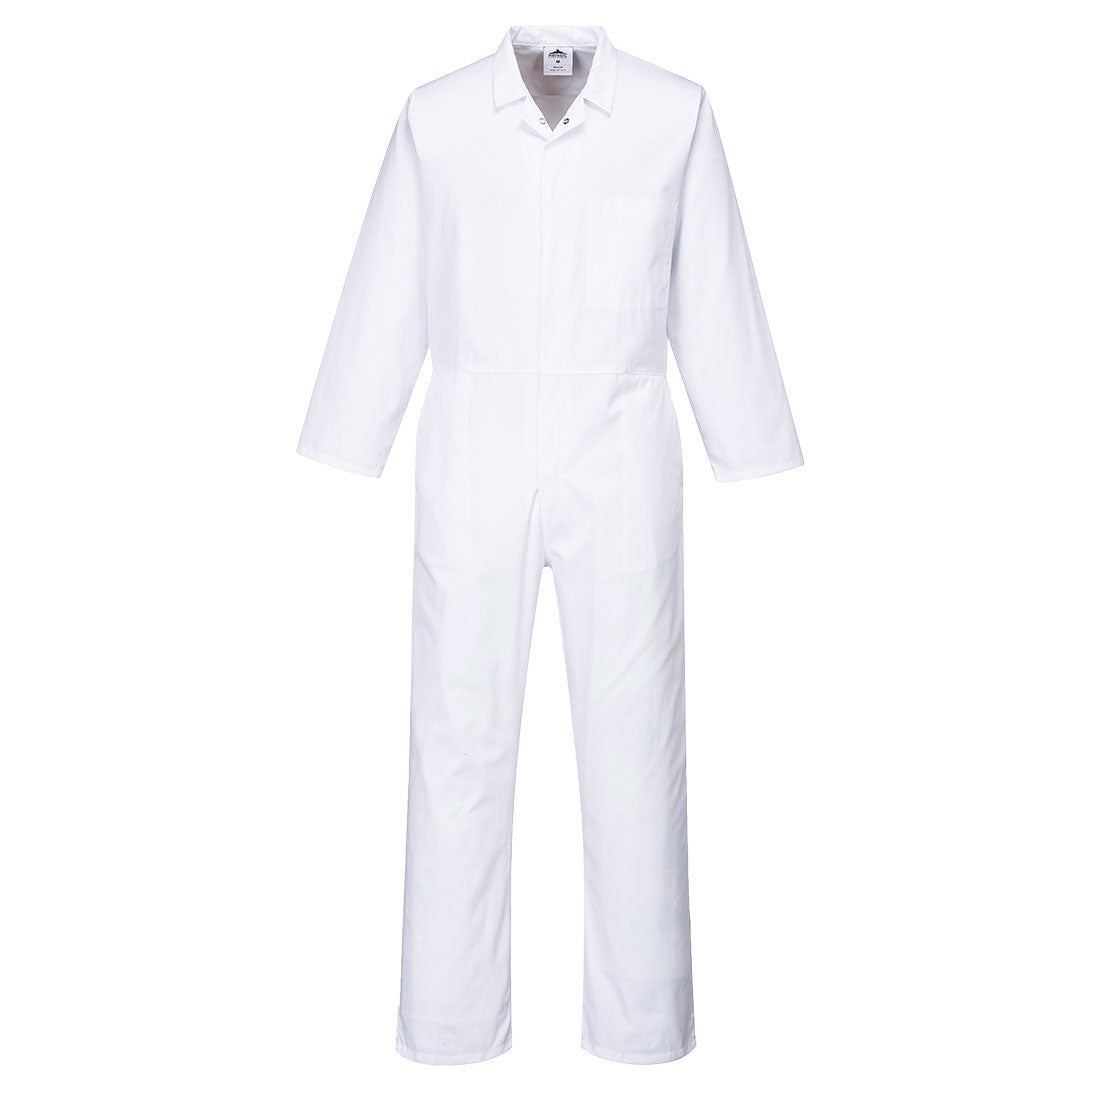 Portwest 2201 - White Food Industry Coverall Boiler Suit sz Small Regular